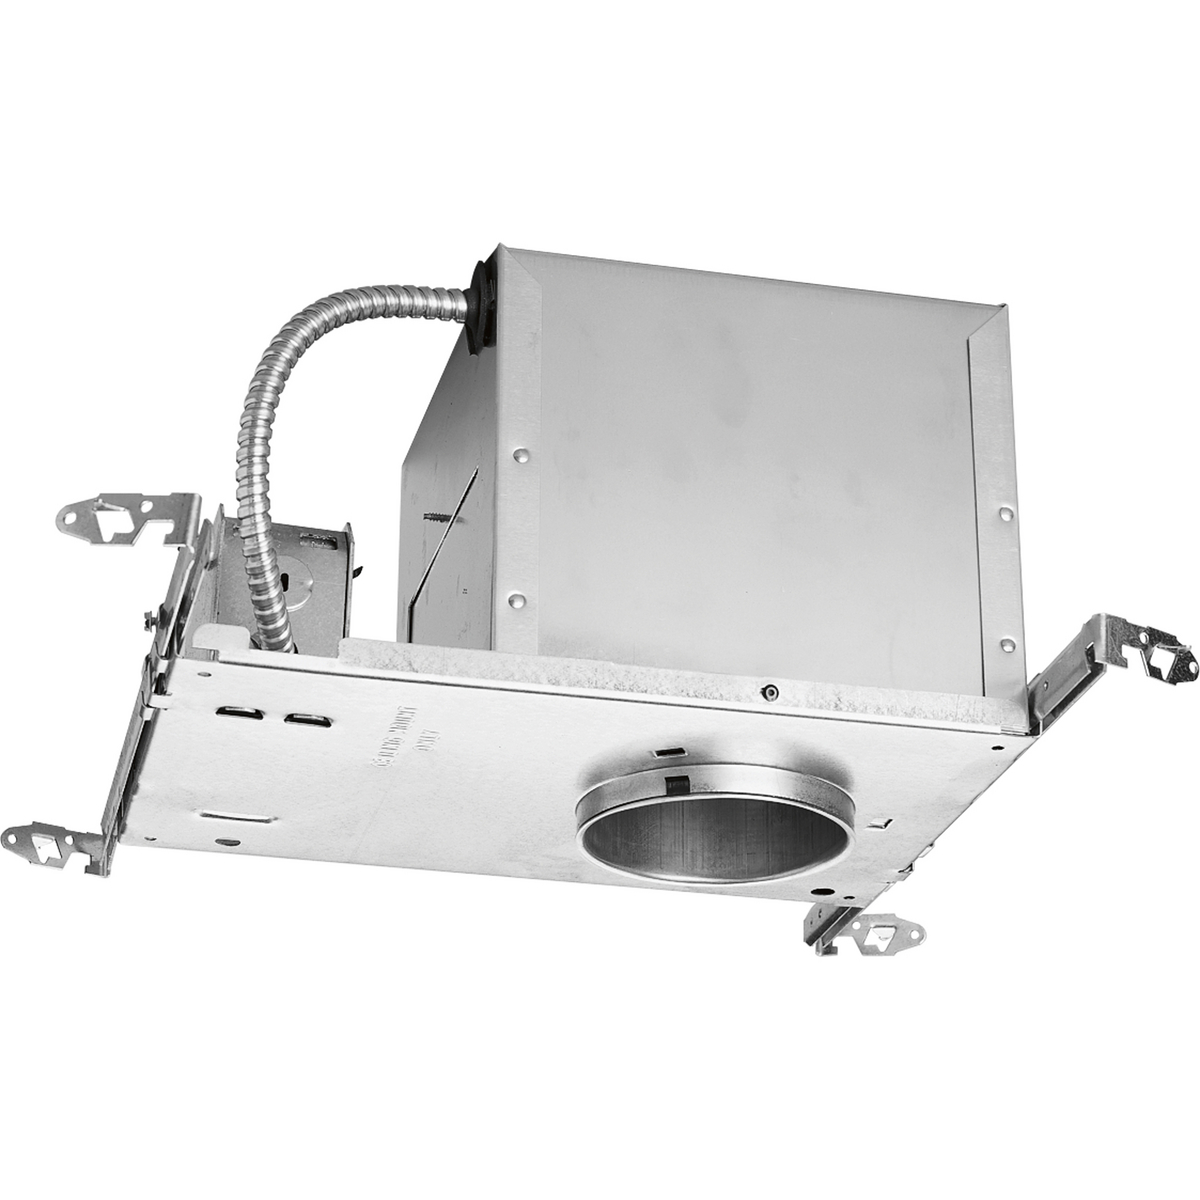 4 in LED Recessed Housing with quick link connector. The new-construction air-tight IC housing is designed for use with P8080 series LED trims.